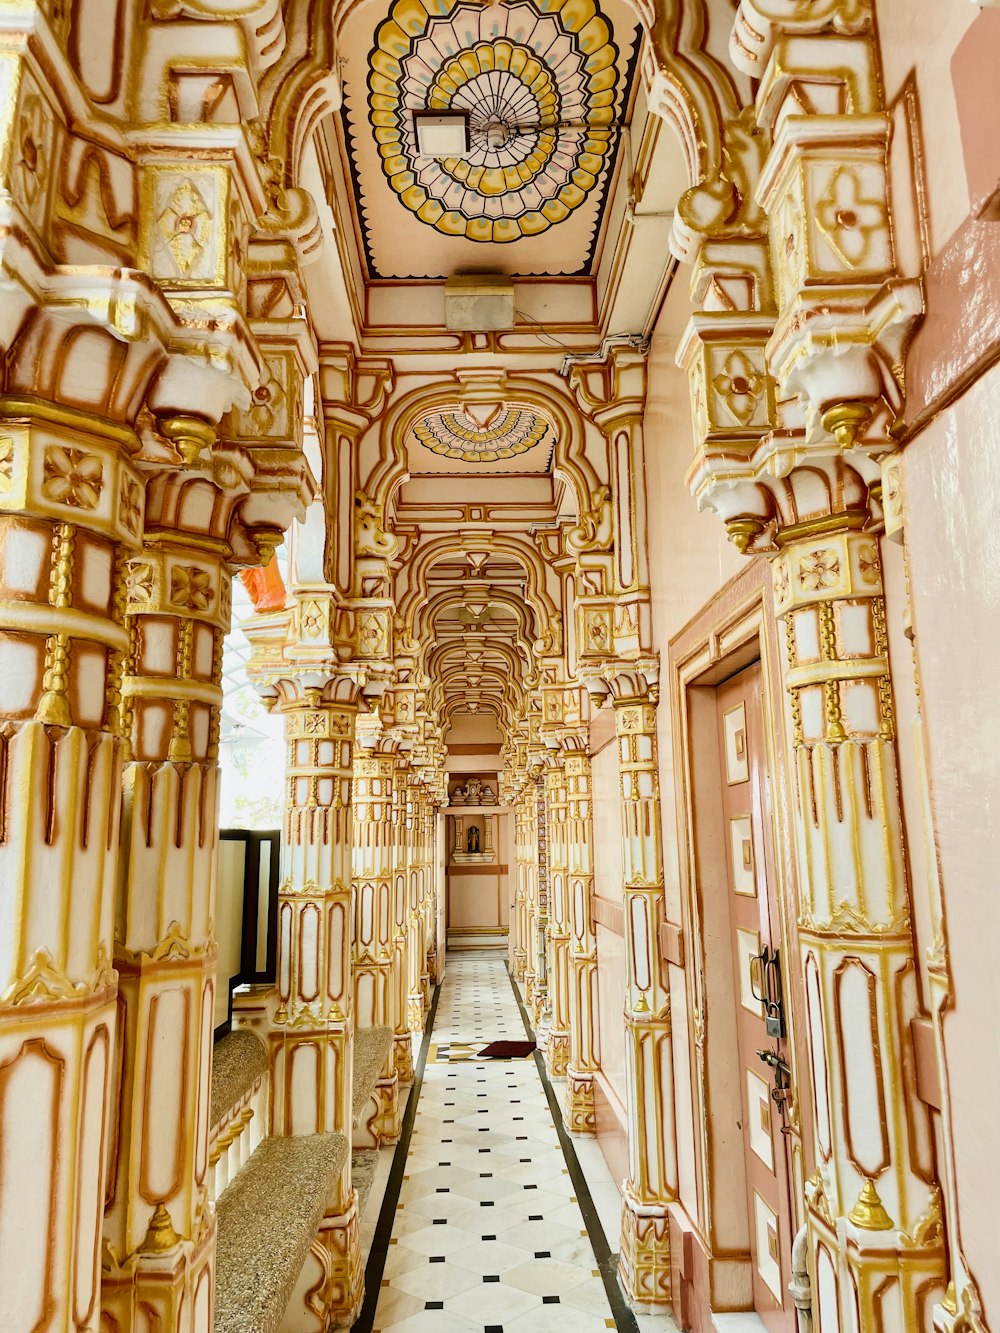 a long hallway with a clock on the ceiling